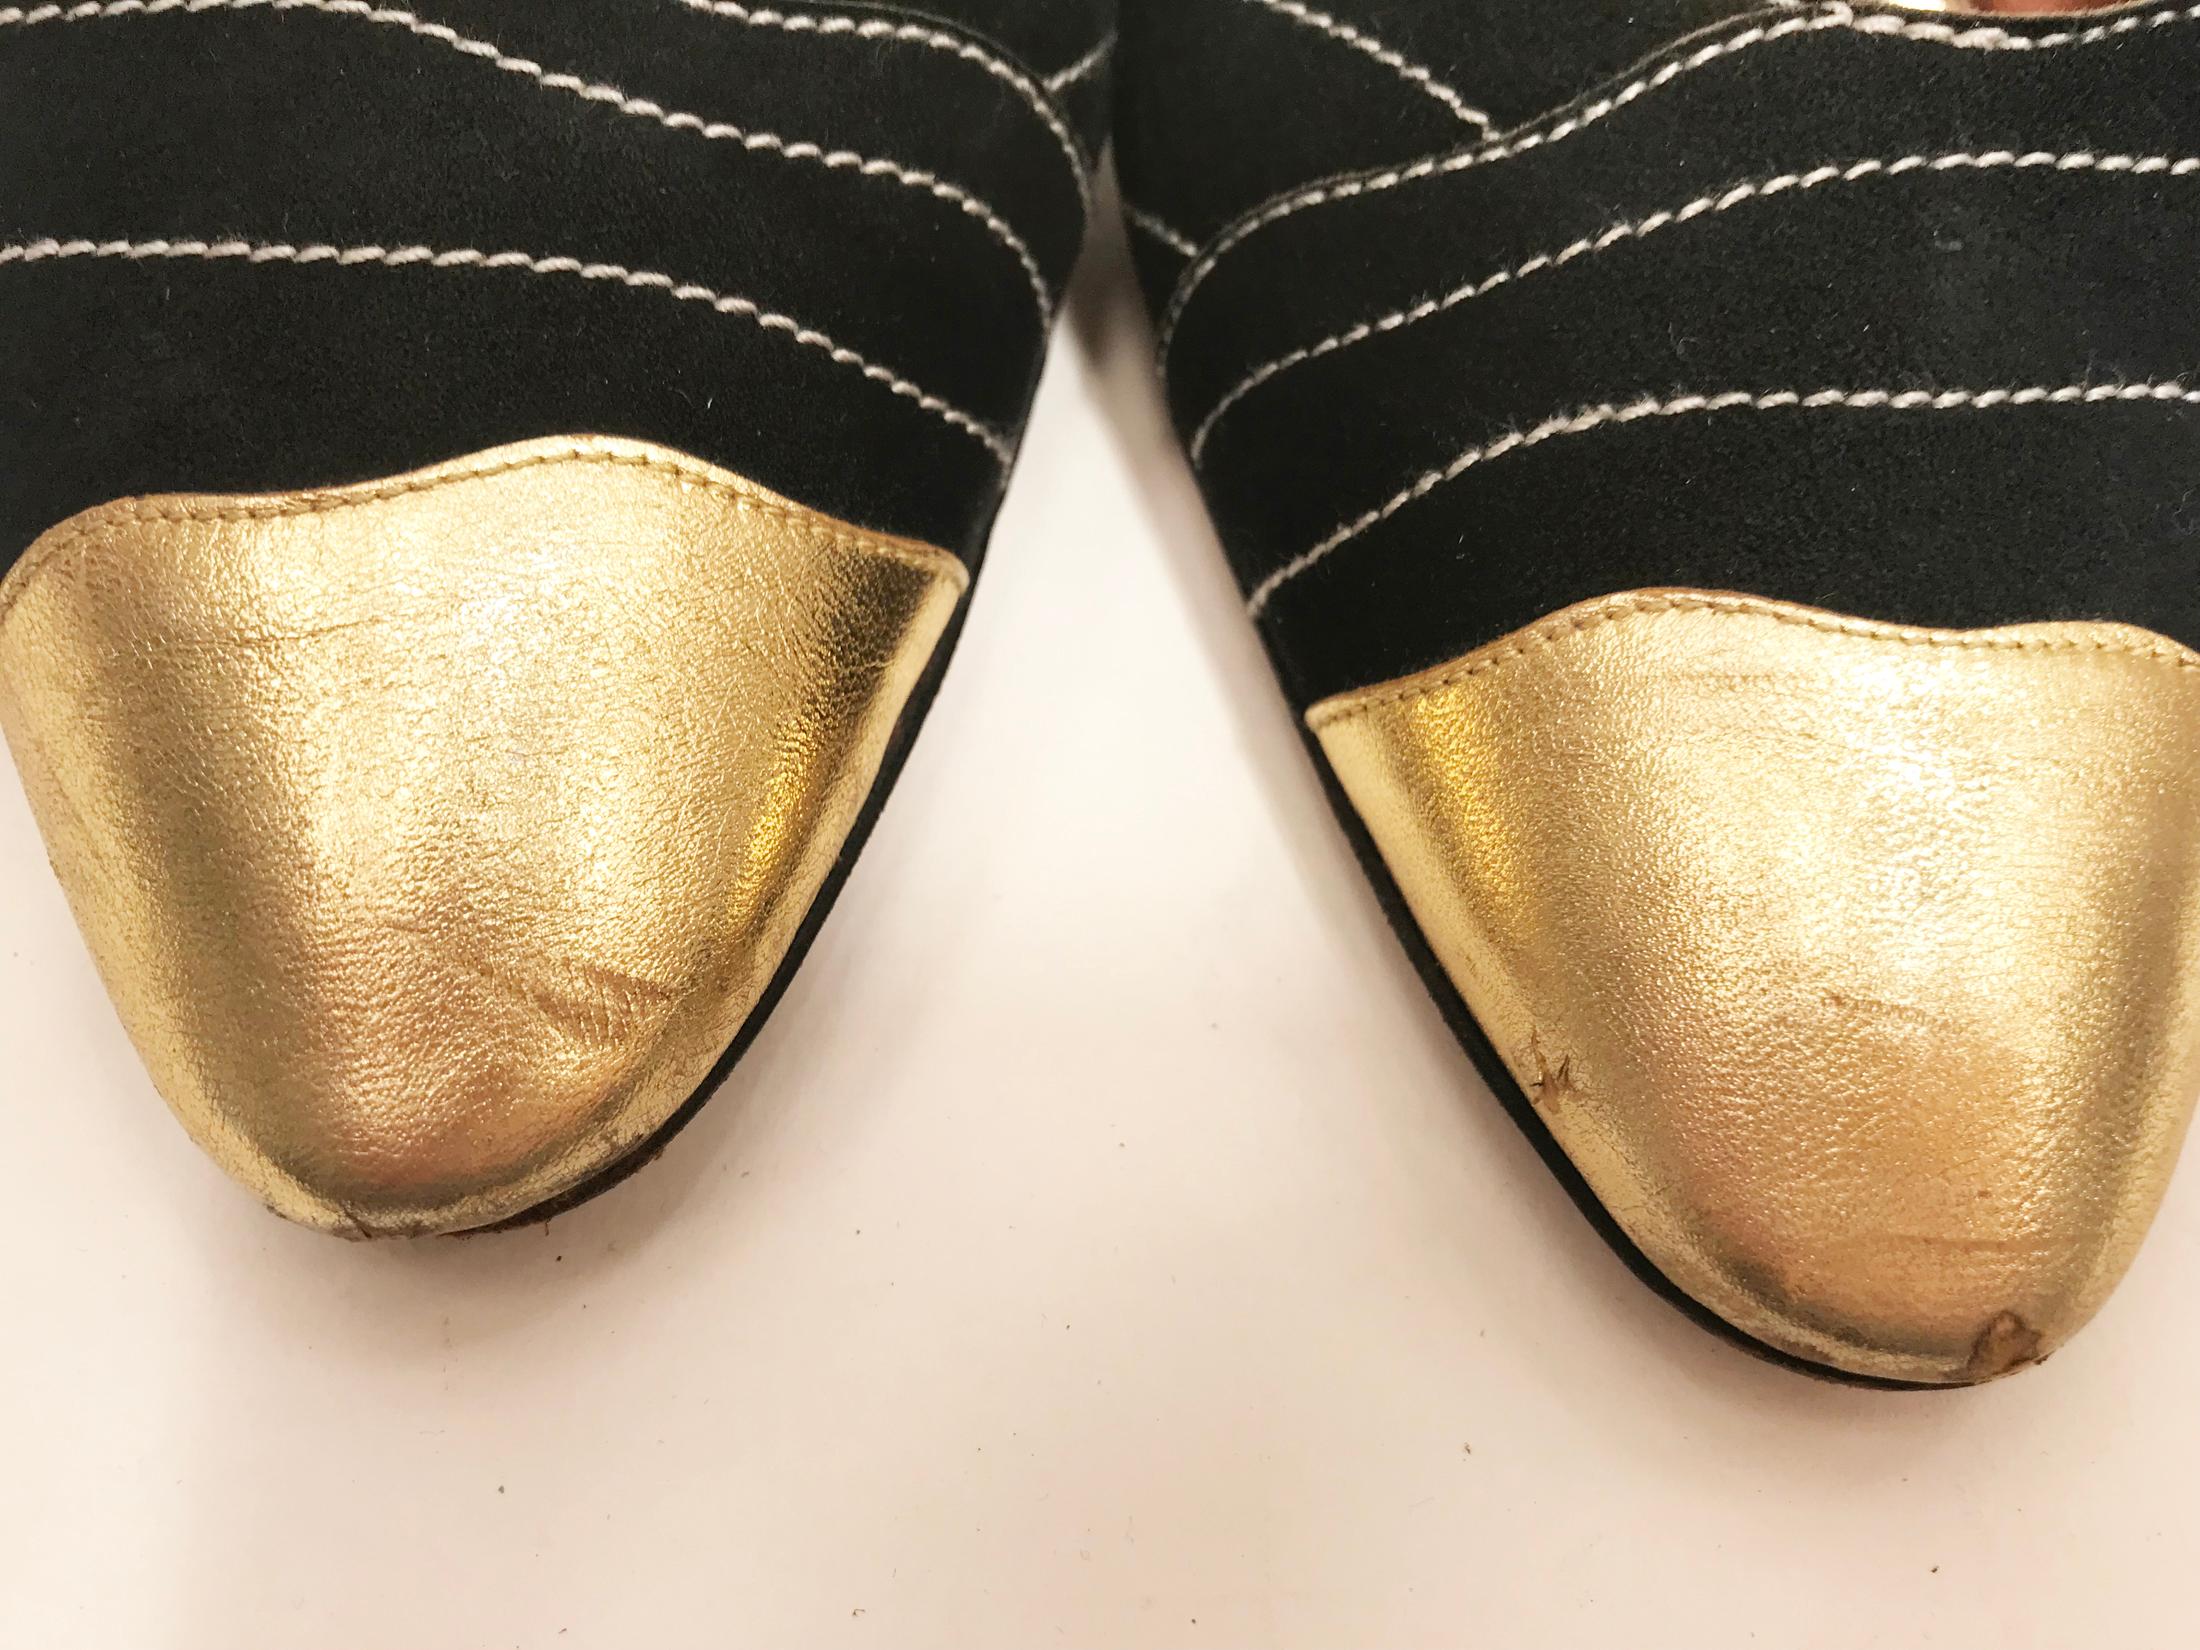 1970's Manolo Blahnik Suede and Gold leather night shoes. 3